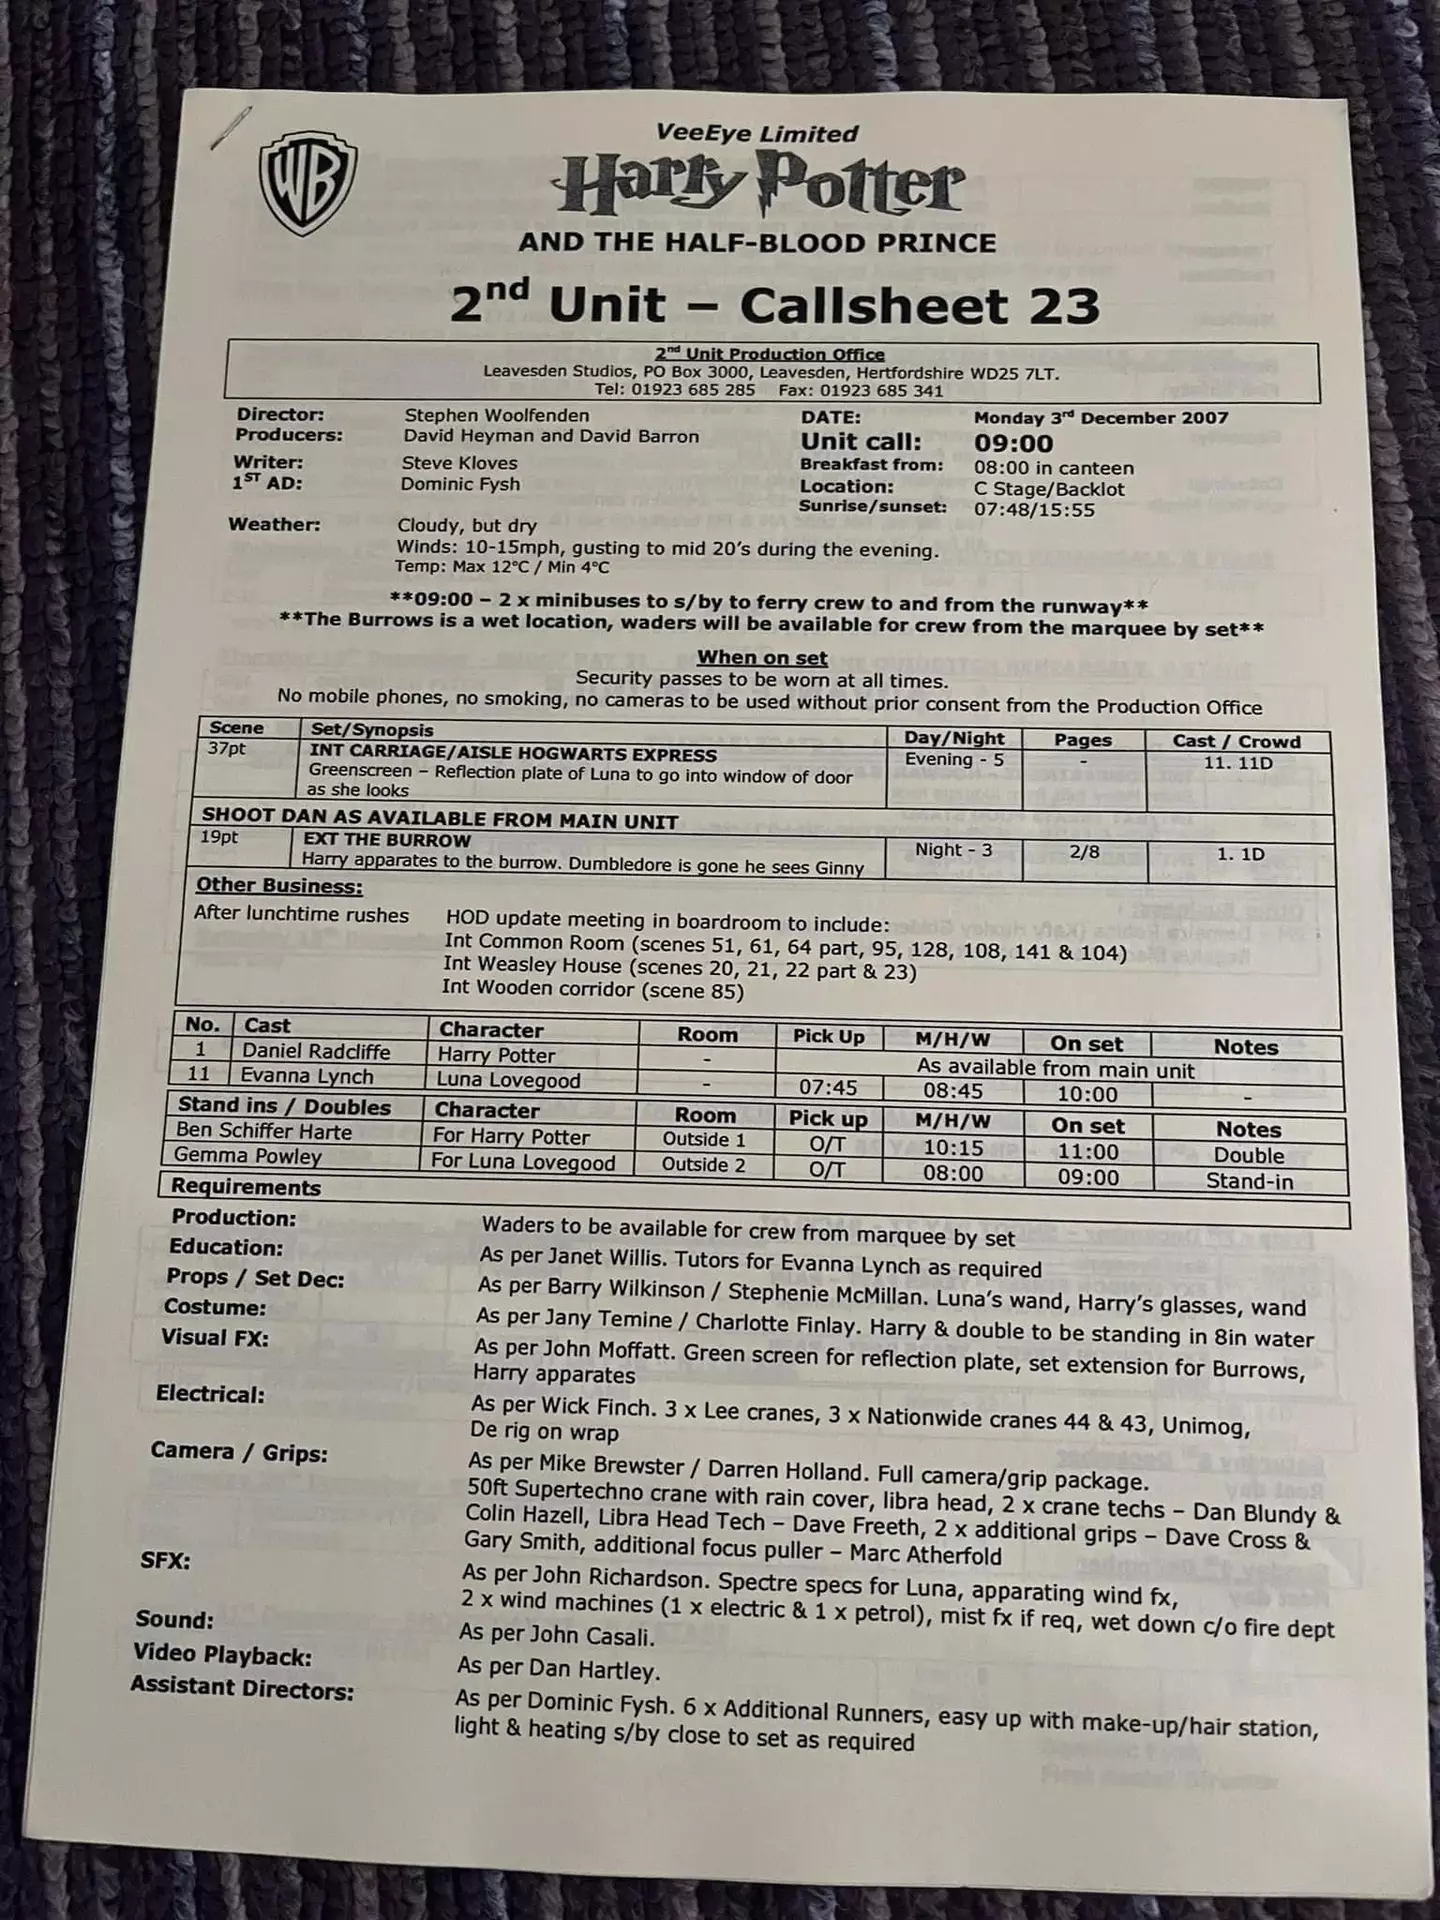 Benjamin showed off the call sheet from his time on the Harry Potter set.